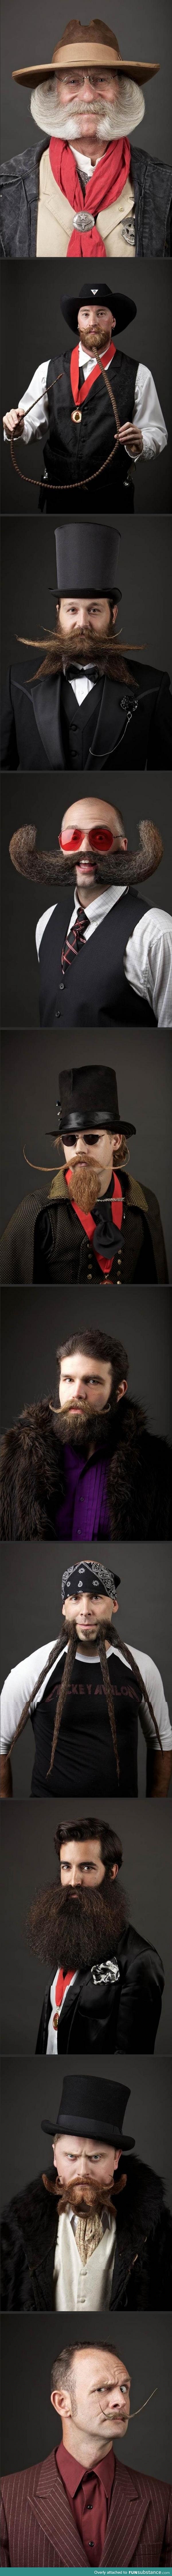 Check out this beard compilation!